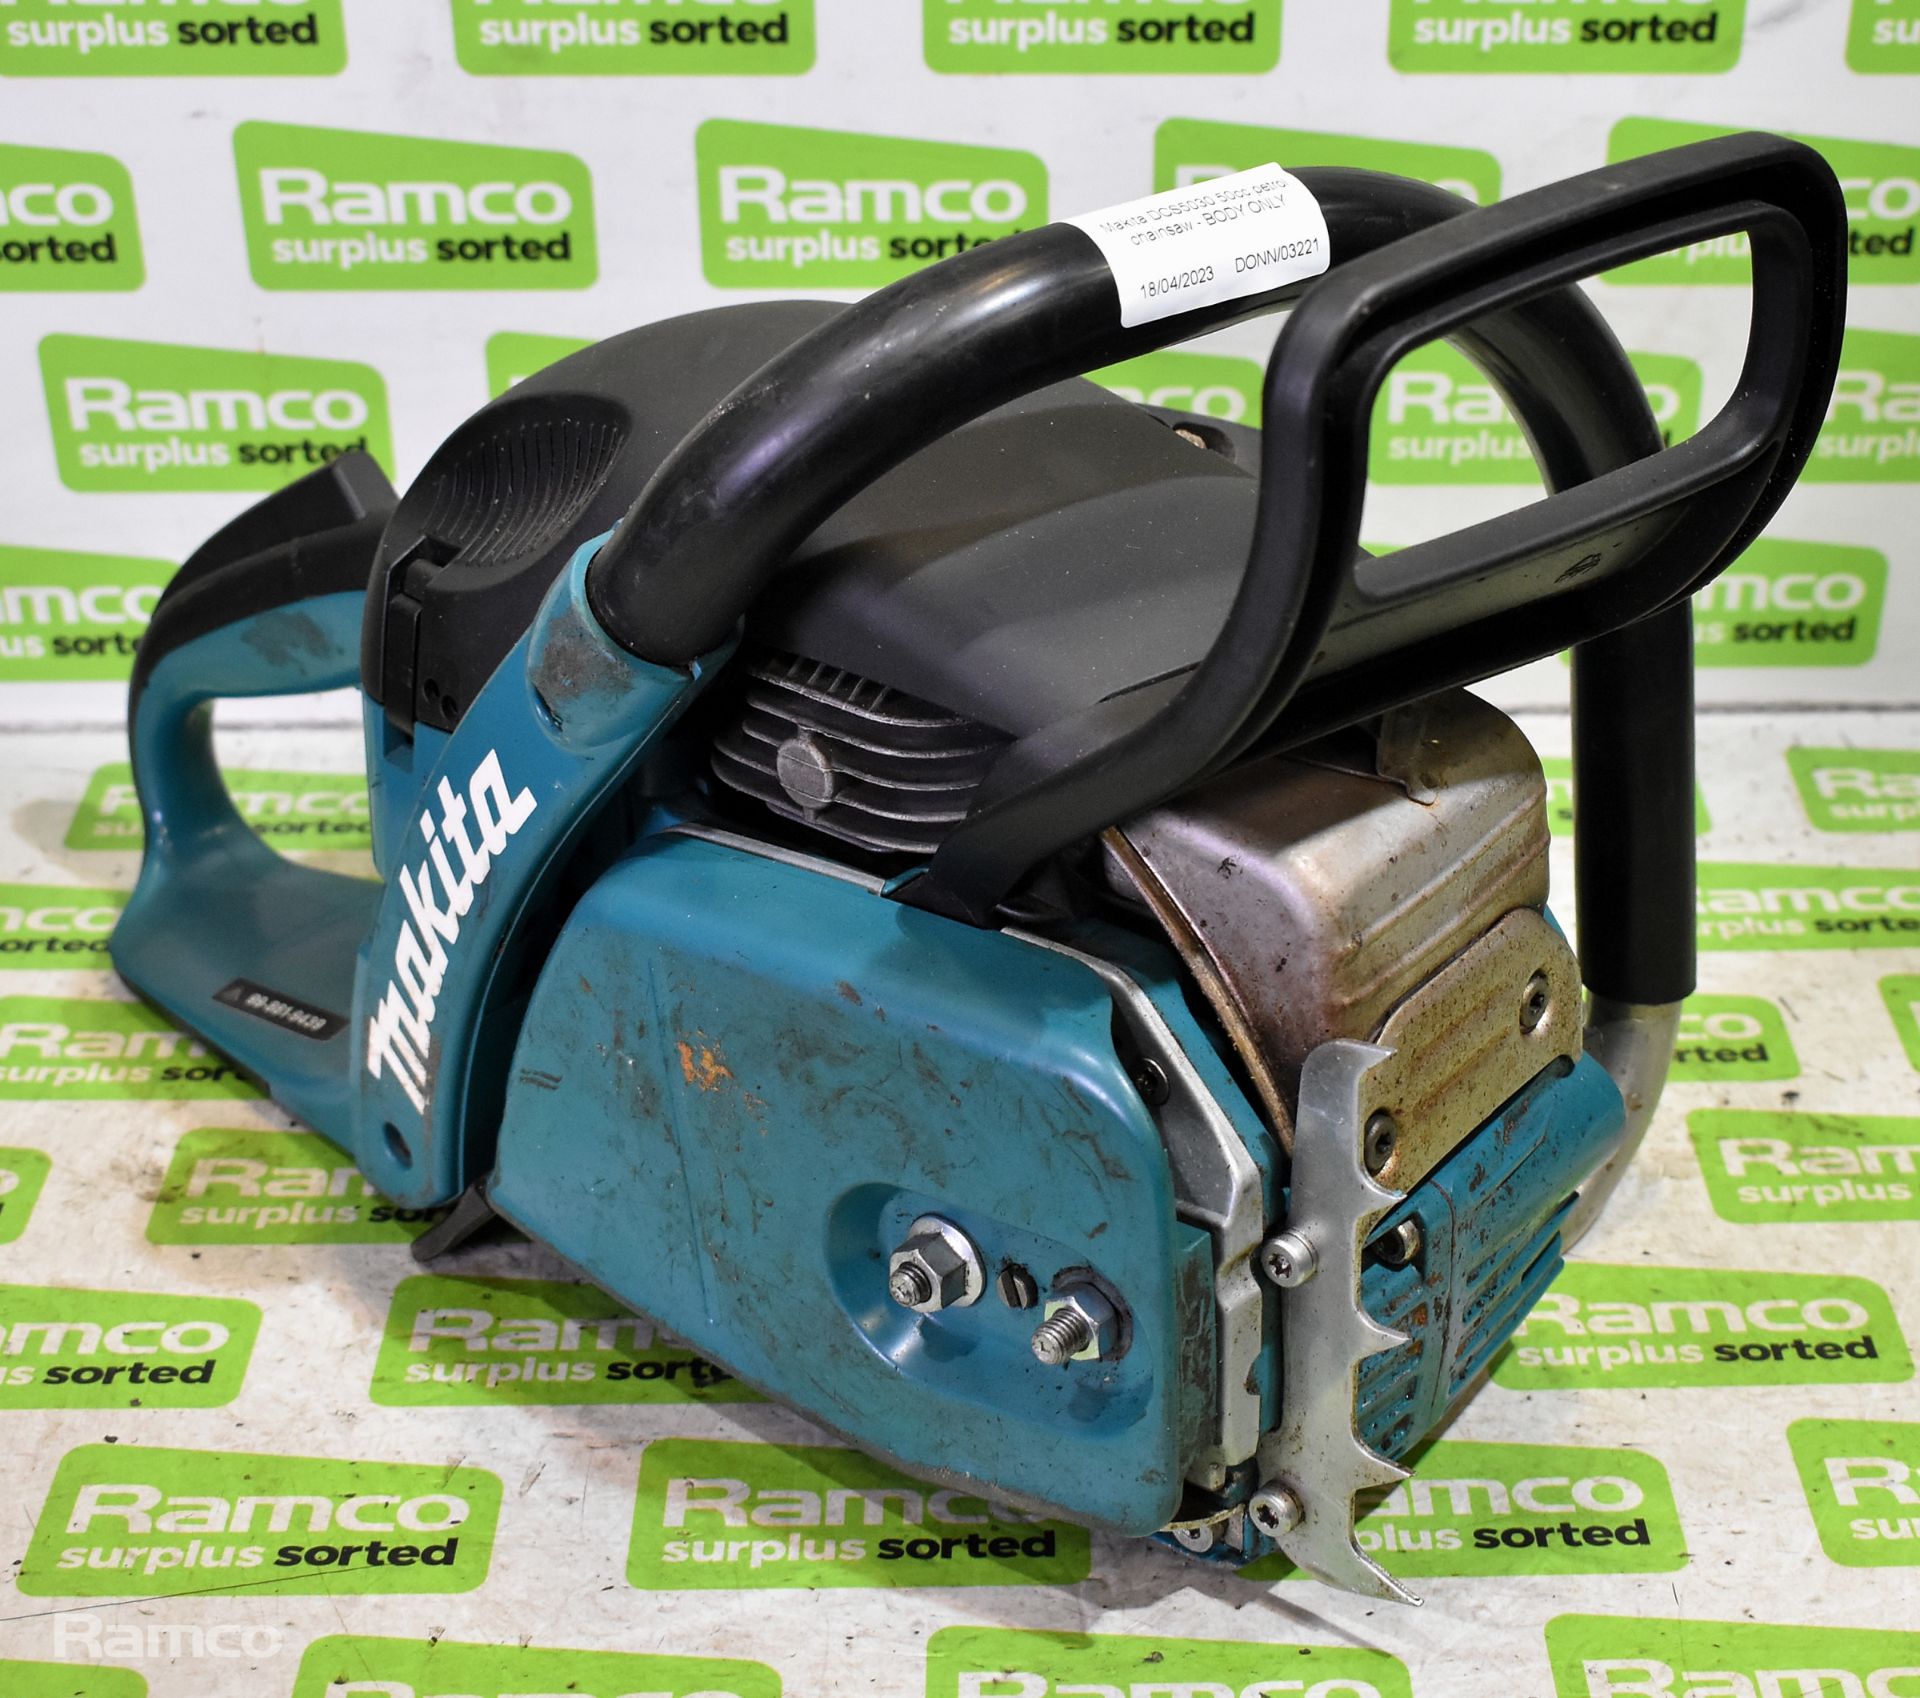 4x Makita DCS5030 50cc petrol chainsaws - BODIES ONLY - AS SPARES OR REPAIRS - Image 8 of 22